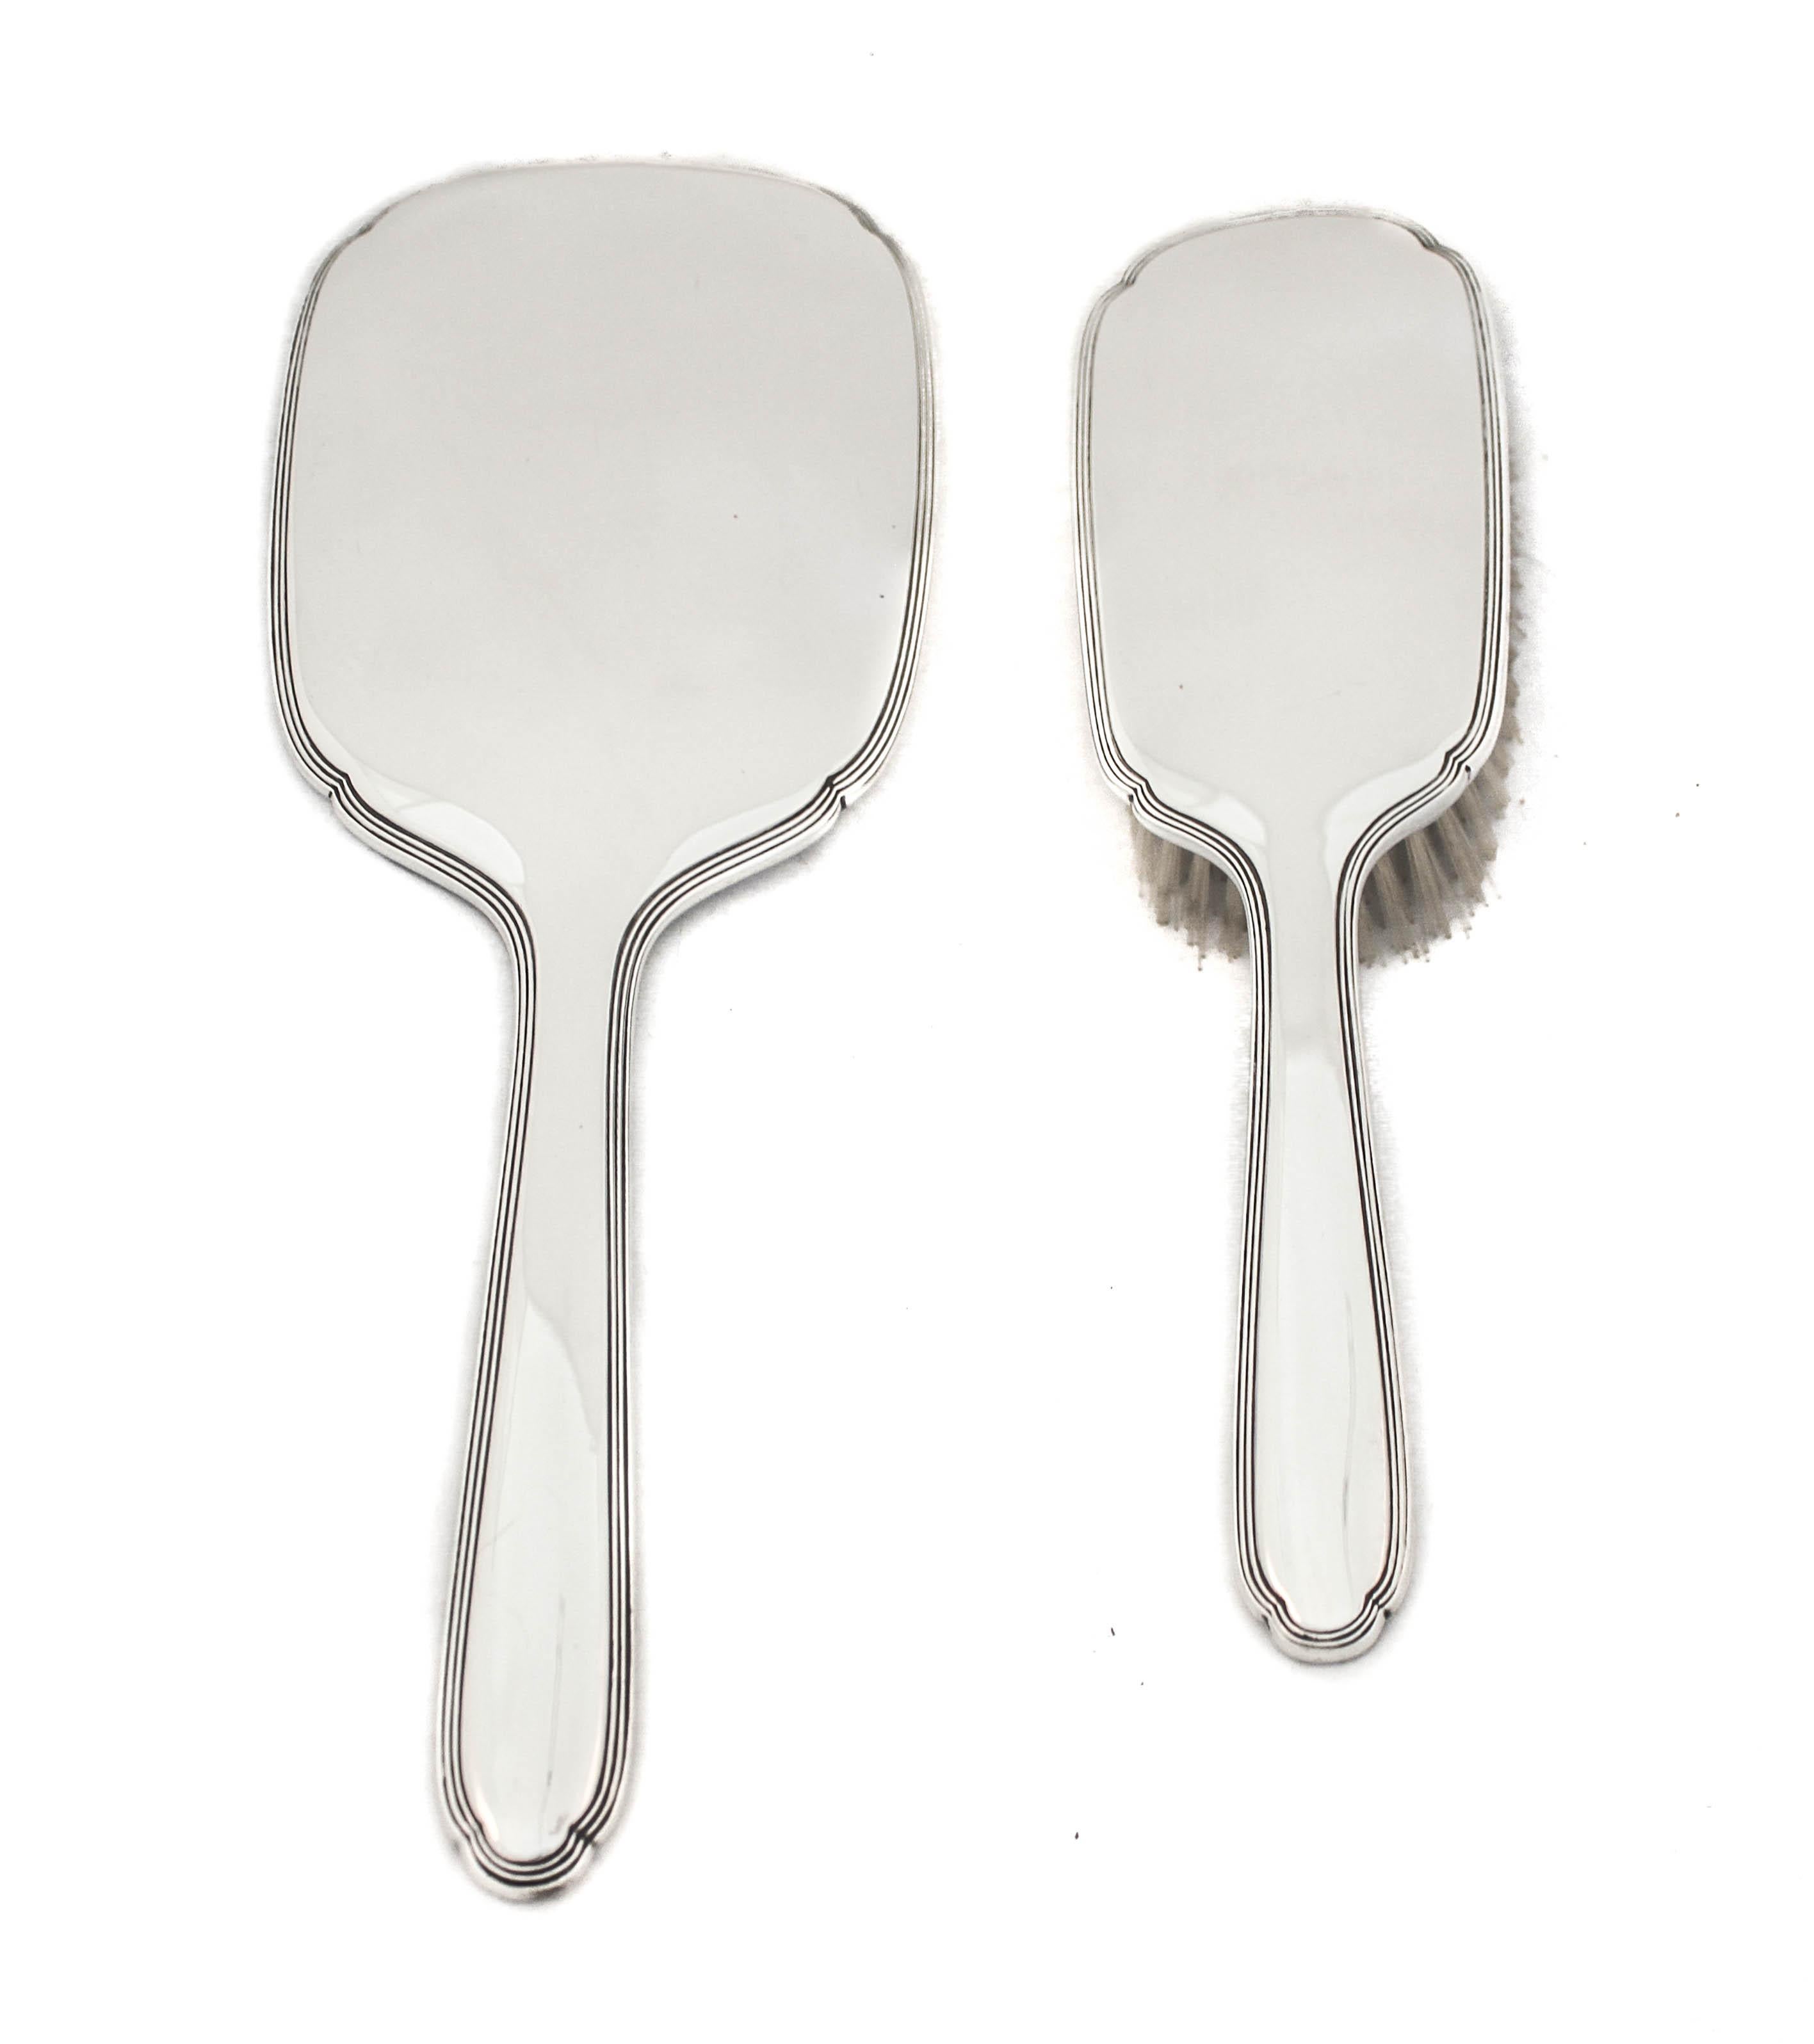 Being offered is a sterling silver (vanity) brush and mirror by R. Blackington & Company of Massachusetts.  It has a sleek and contemporary look that gives the impression it’s new but it’s not.  Three ridges follow the outline of each piece, other